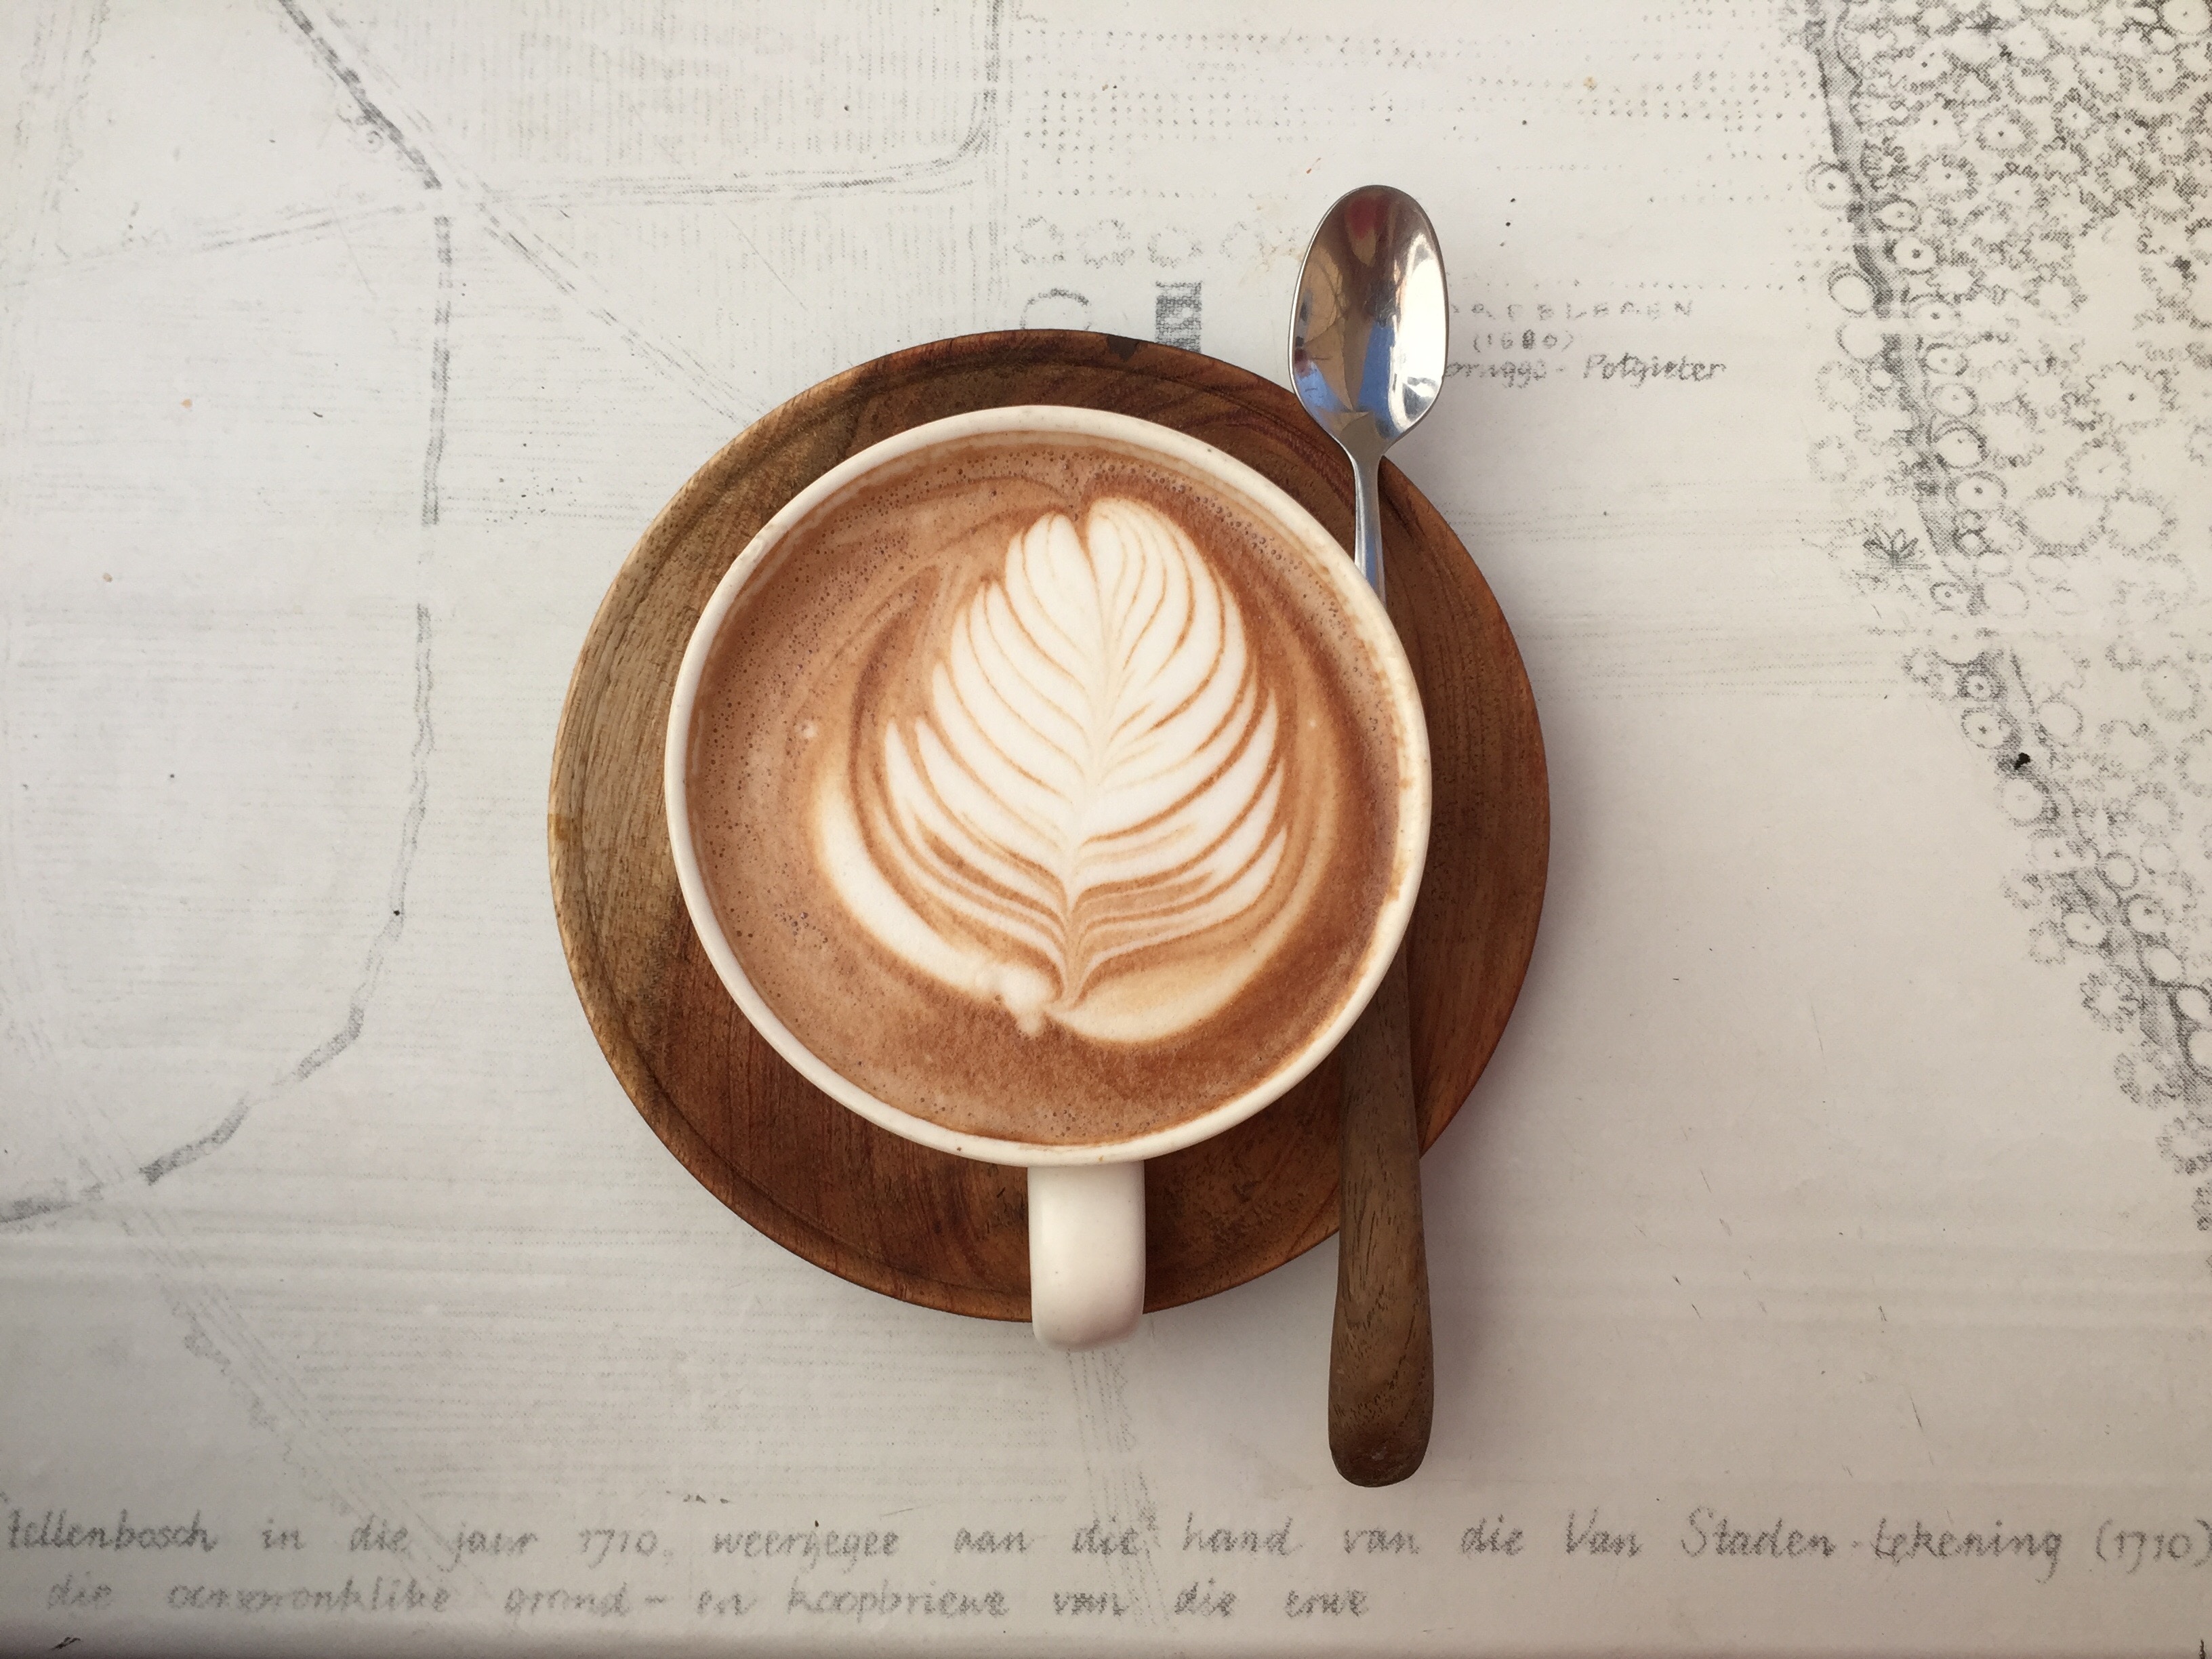 Wallpapers architectural cappuccino coffee on the desktop